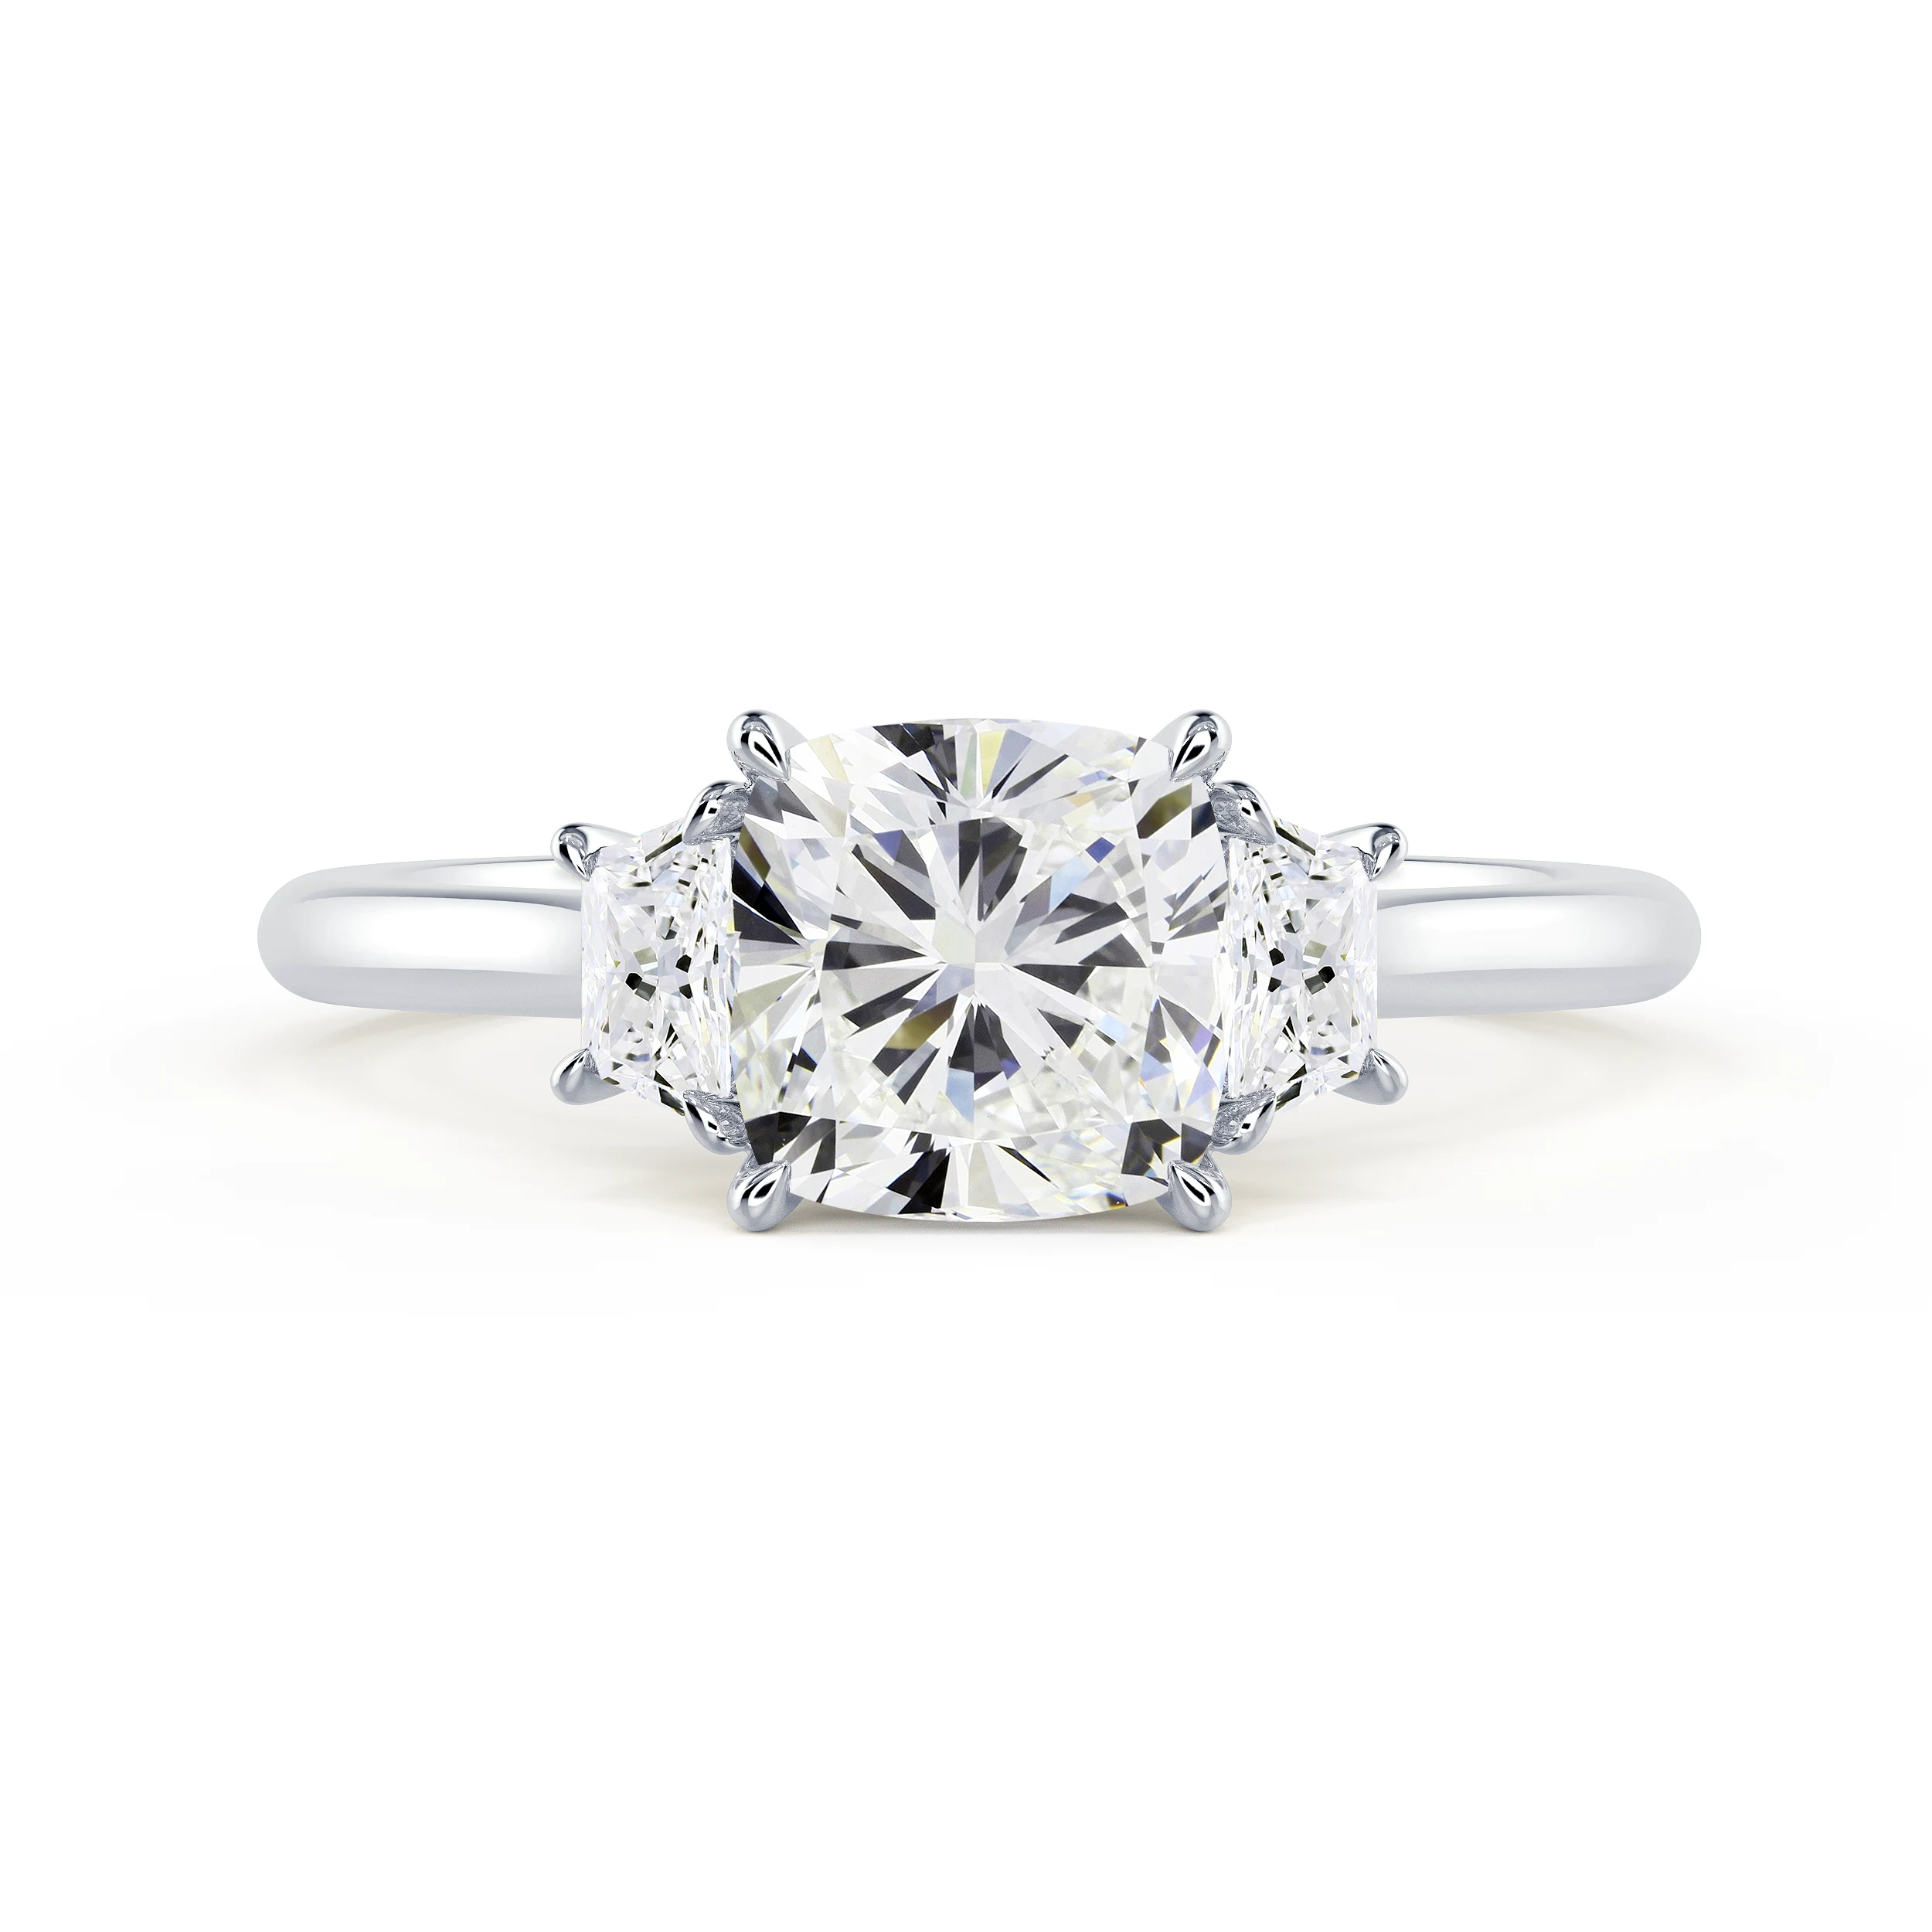 White Gold Cushion and Trapezoid Diamond Engagement Ring featuring Lab Diamonds (Main View)